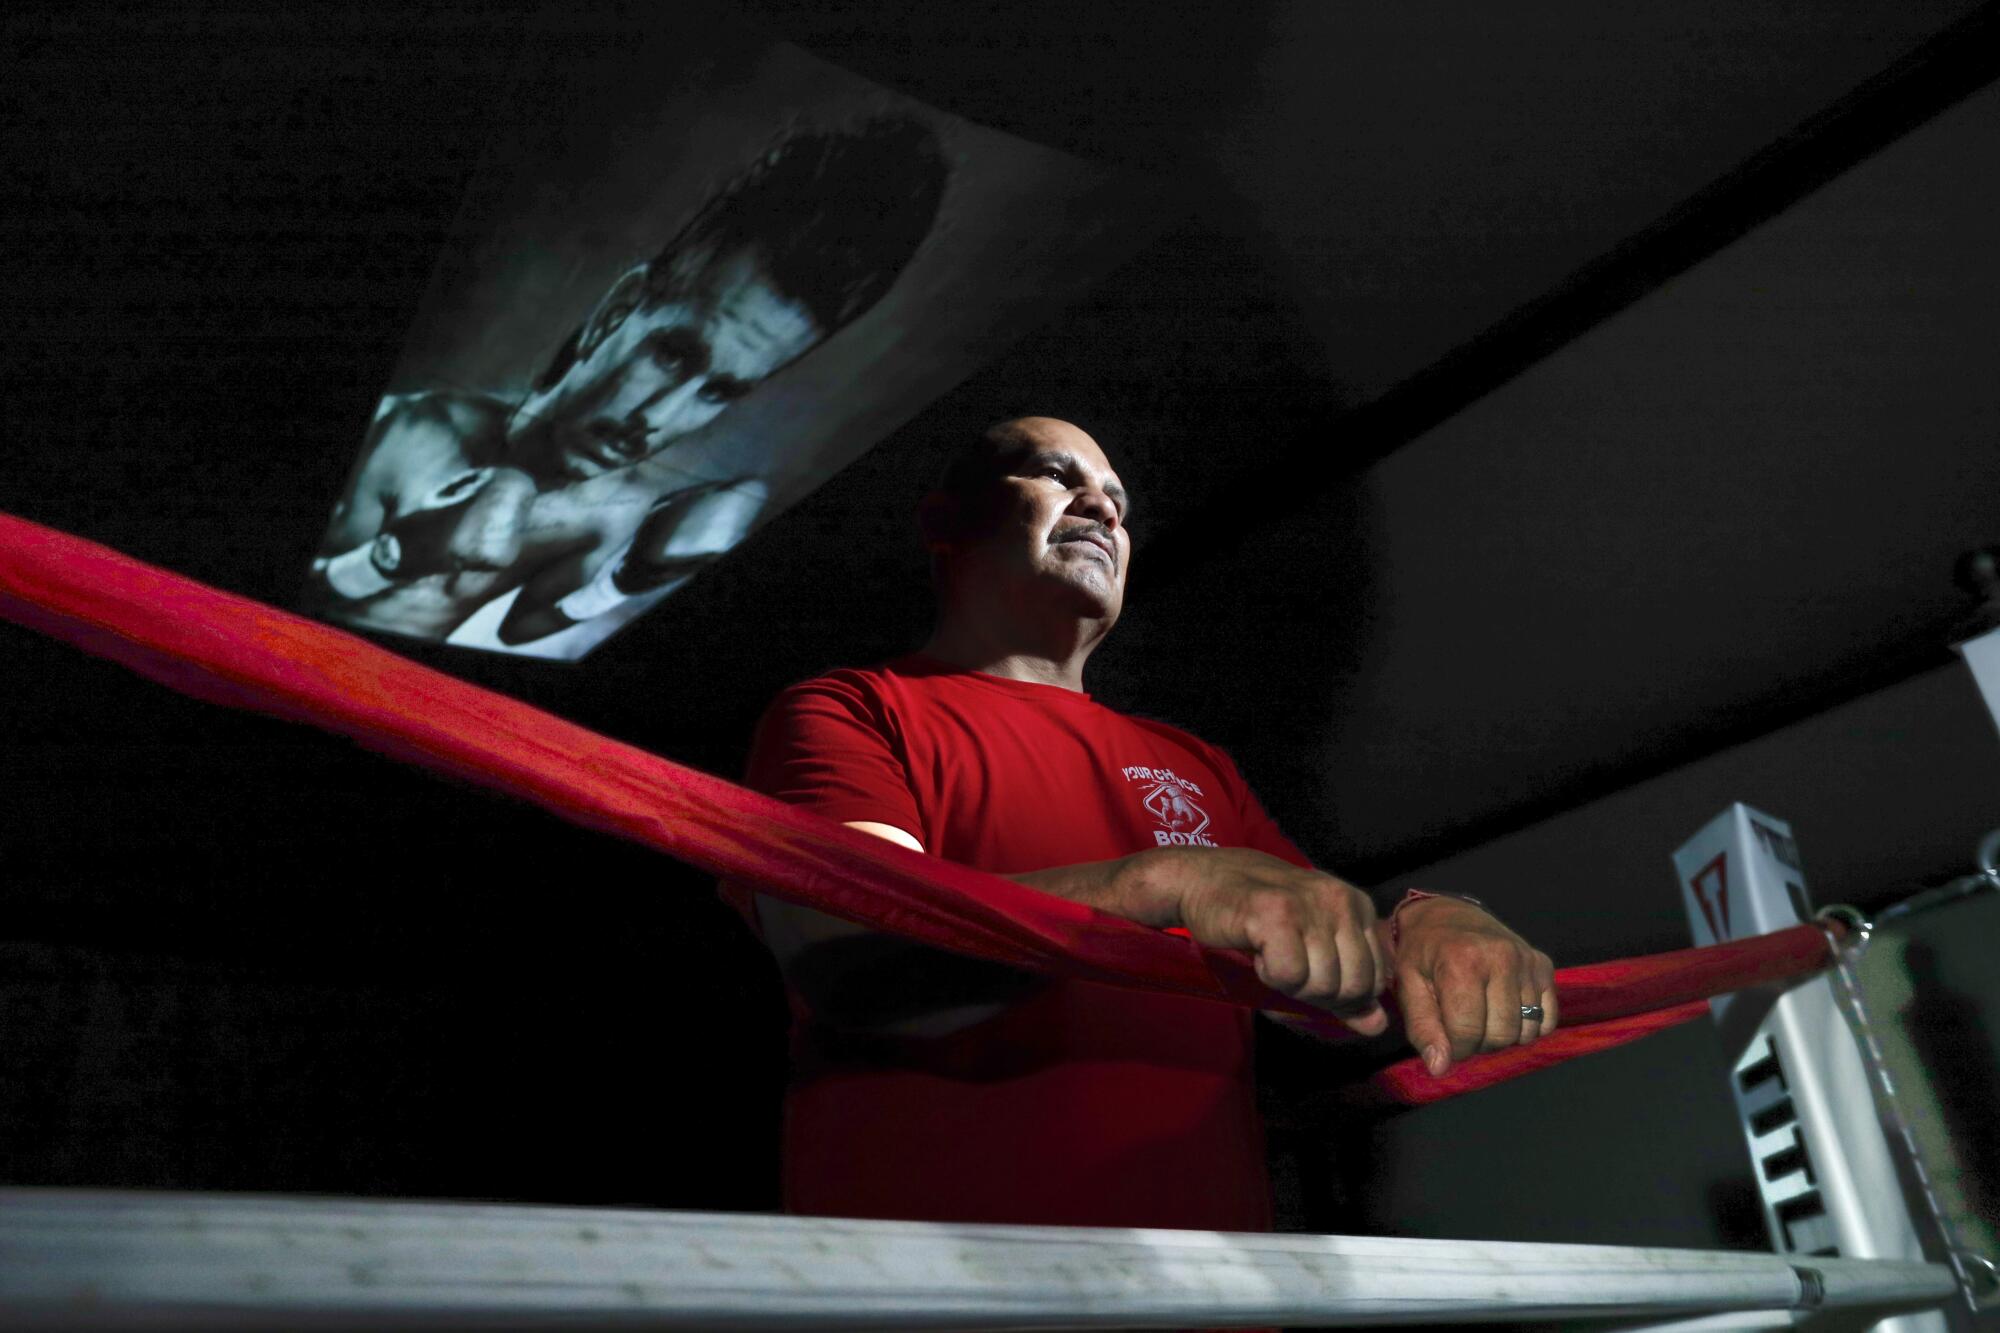 Retired fighter Hector Lizarraga leans against the ropes of a boxing ring dressed in a red shirt. 